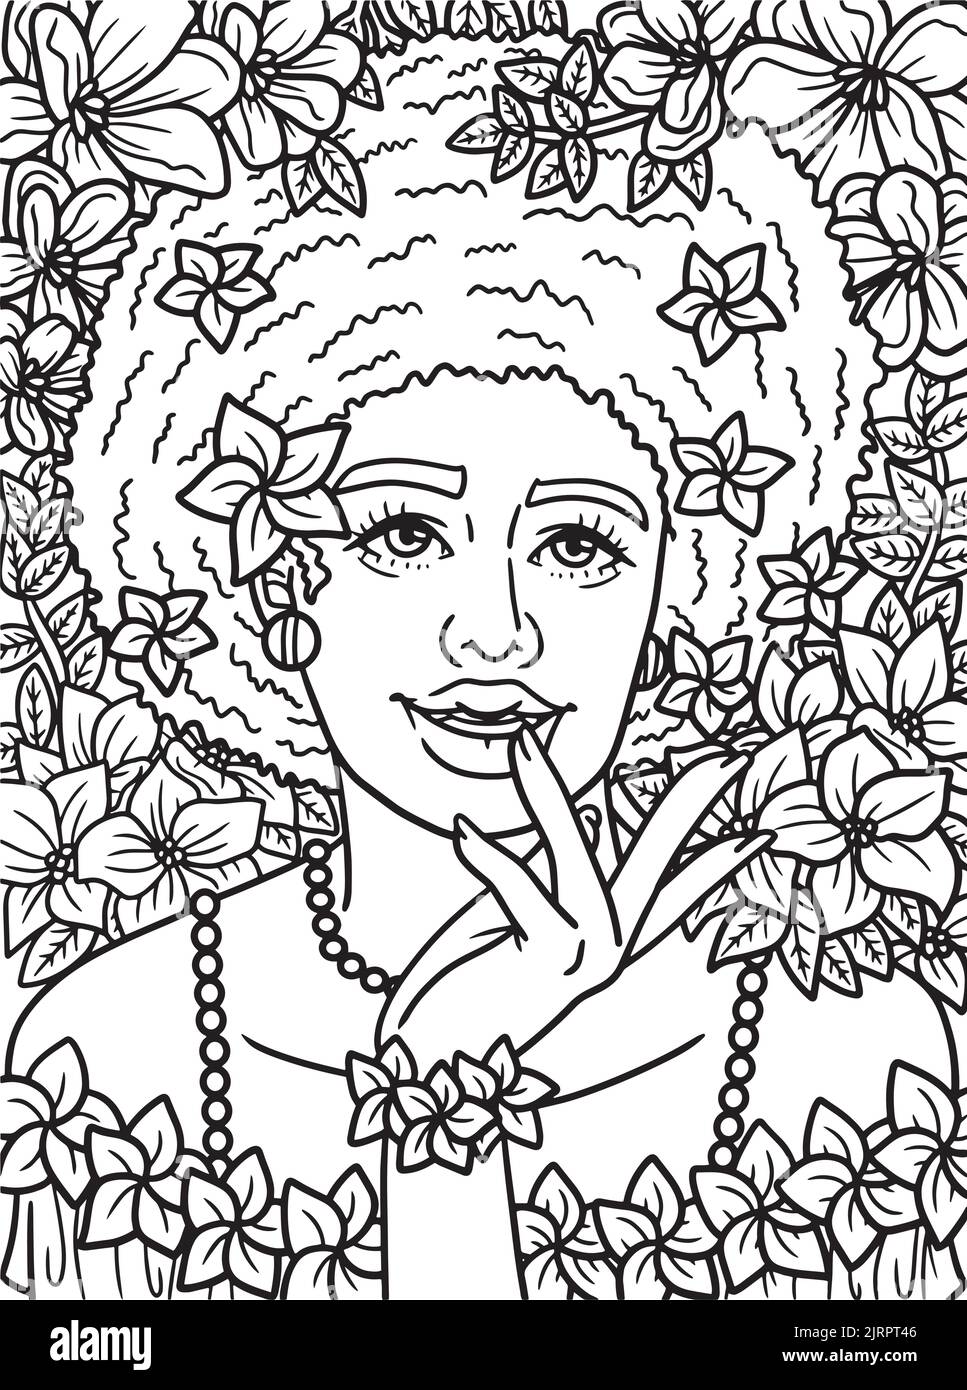 Afro American Flower Girl Coloring Page for Kids Stock Vector